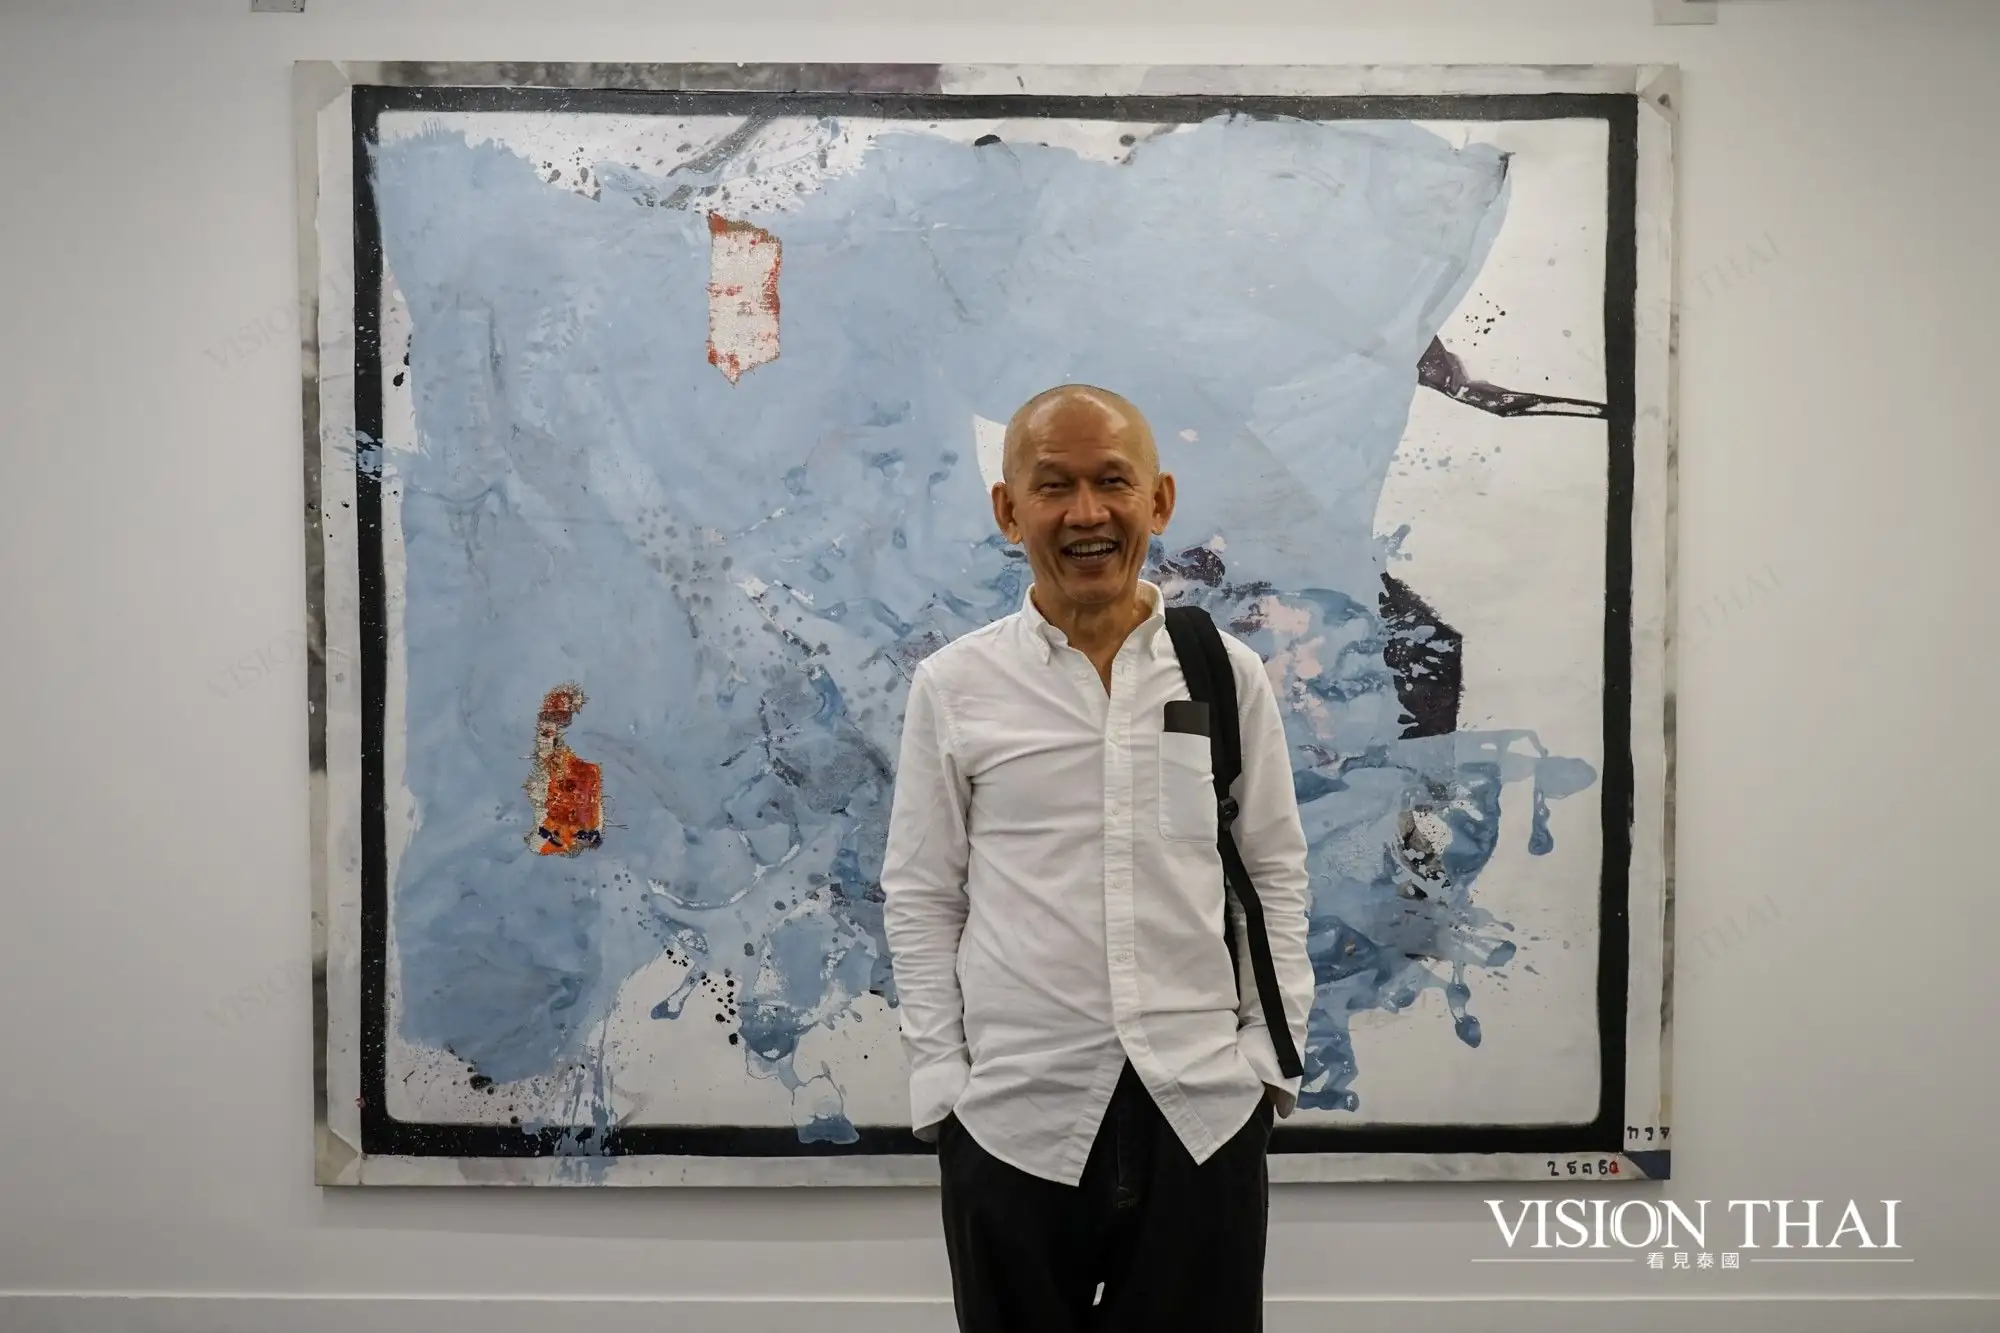 We Create Miracle from What We Are : Exhibition by Thaiwijit創意展在暢萃文創園區